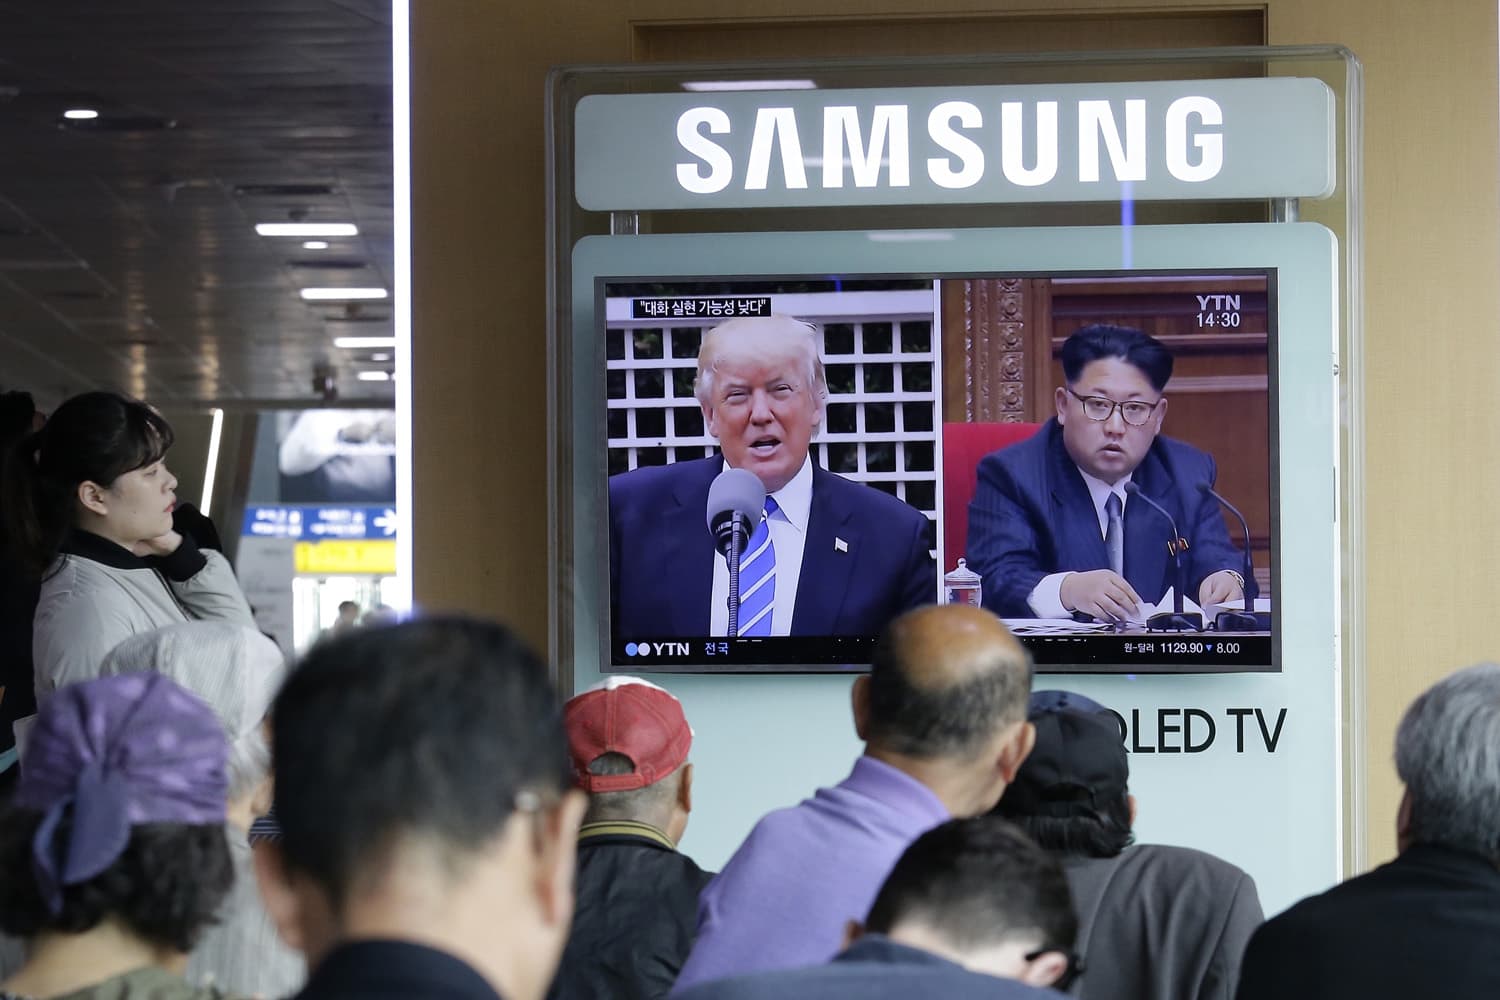 A TV screen shows images of U.S. President Donald Trump, left, and North Korean leader Kim Jong Un during a news program at the Seoul Railway Station in Seoul, South Korea. (Ahn Young-joon/AP)